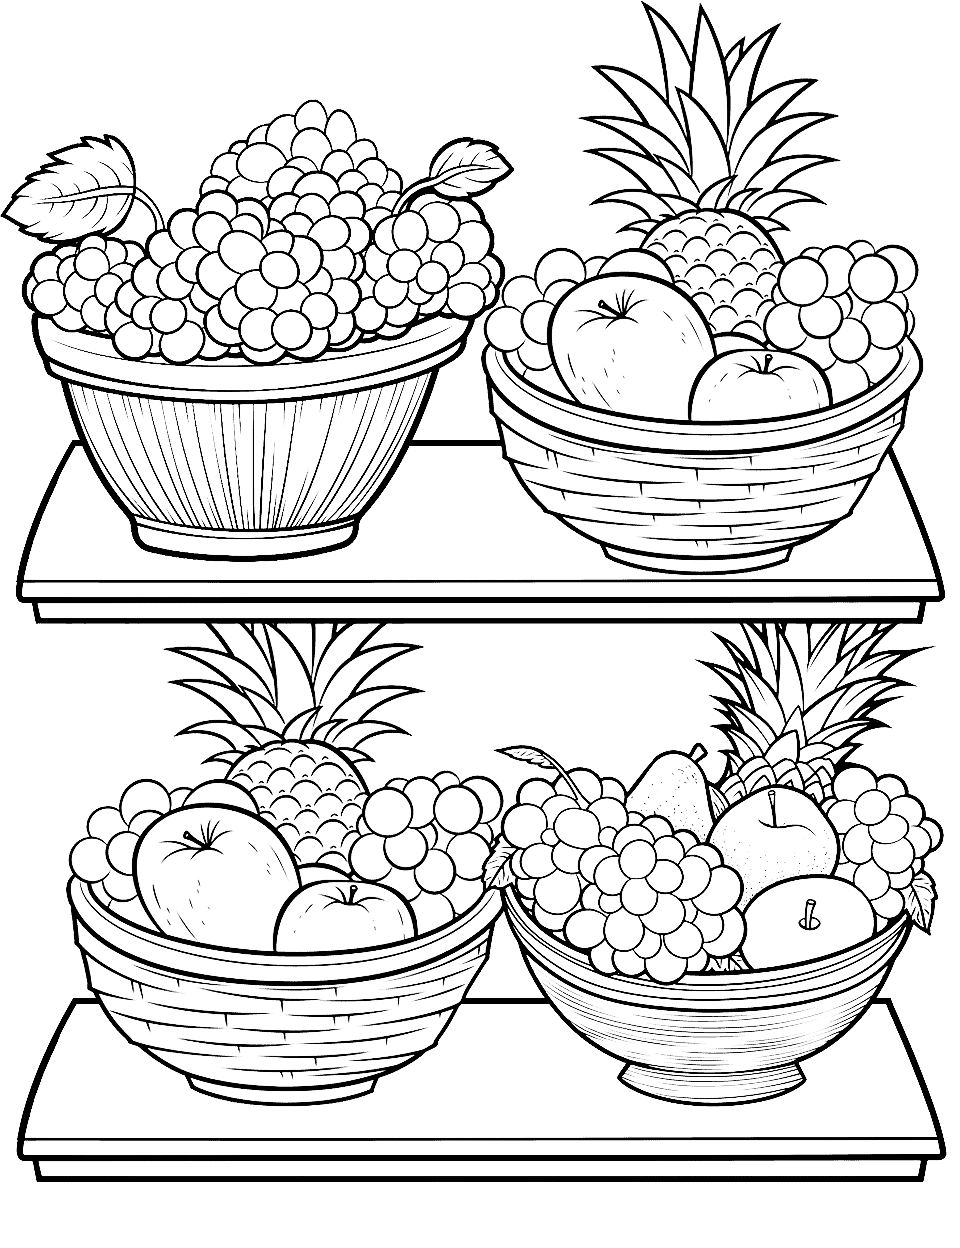 Fruit Bakery Shop Coloring Page - Fruits displayed as bakery items like cakes and pastries.